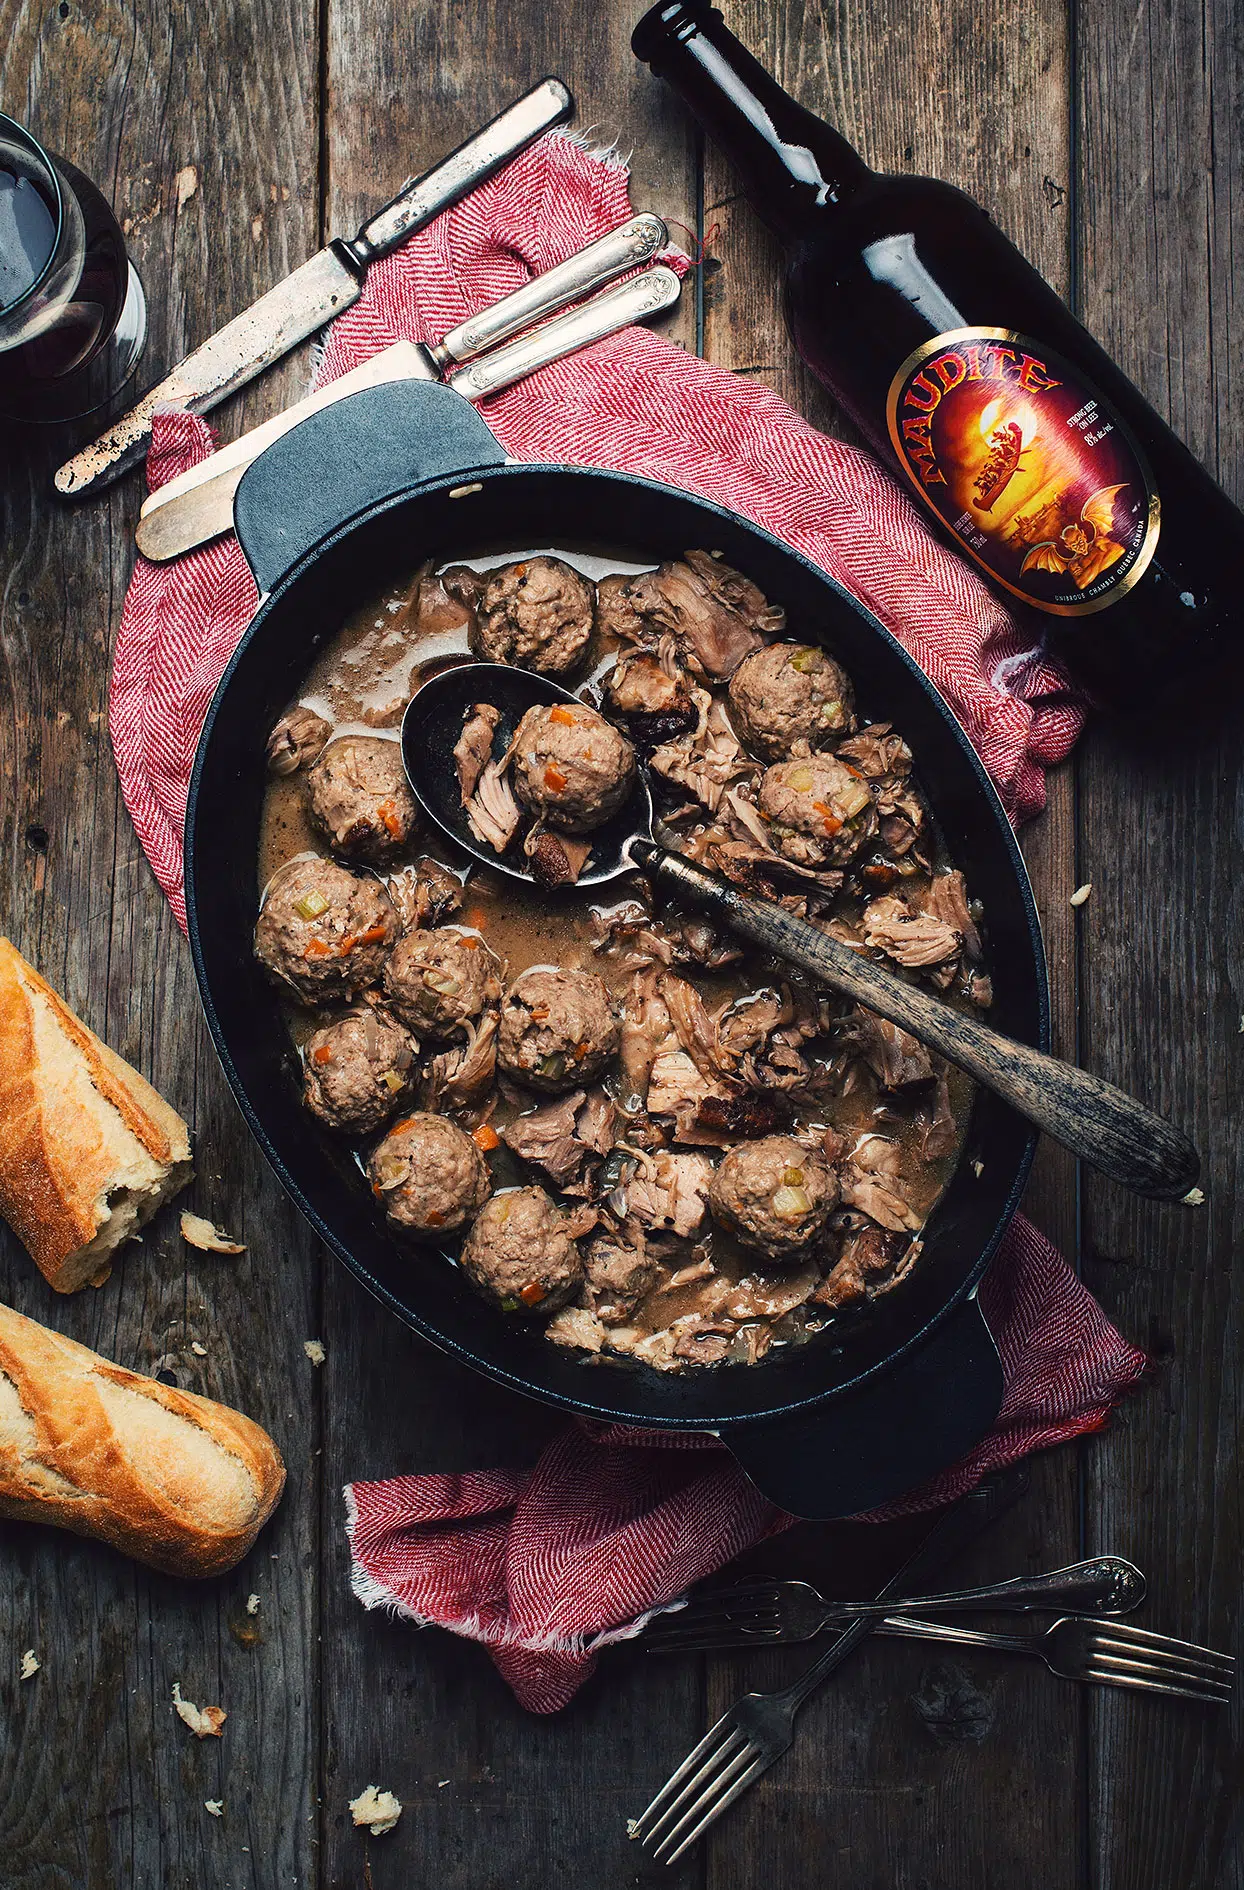 Meatballs and pork legs stew with Maudite beer